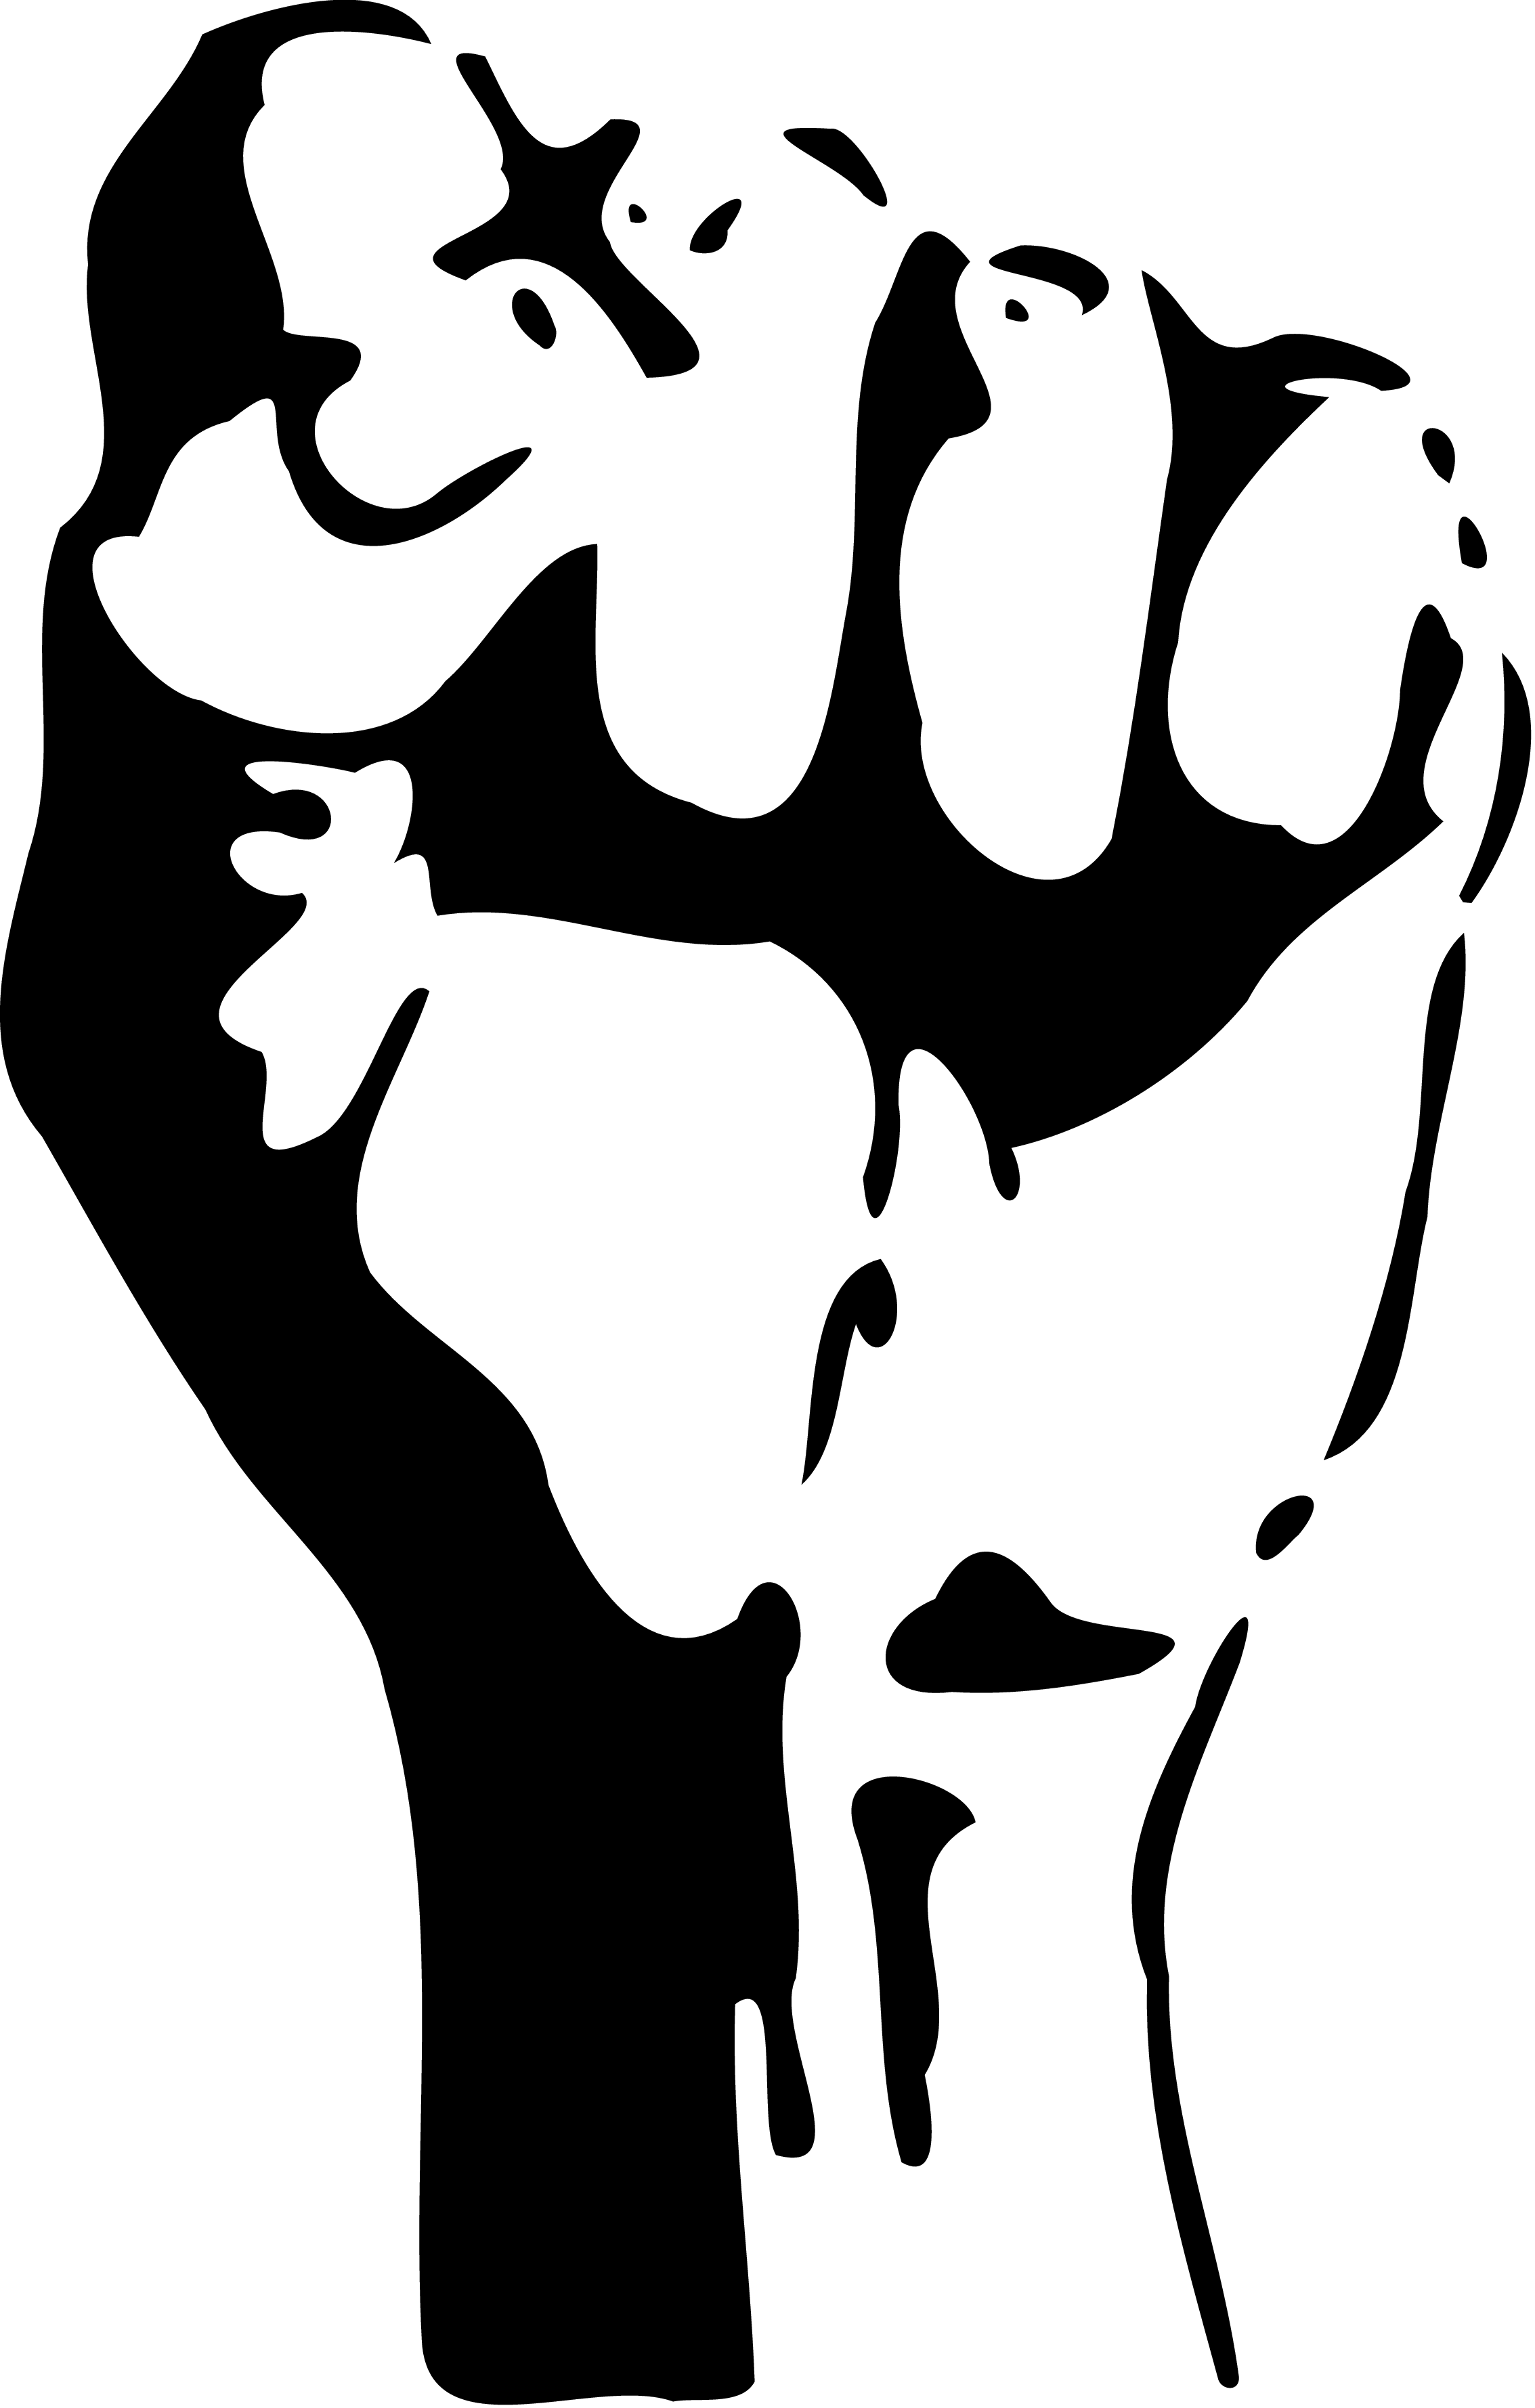 Black Power Fist PNG Pic